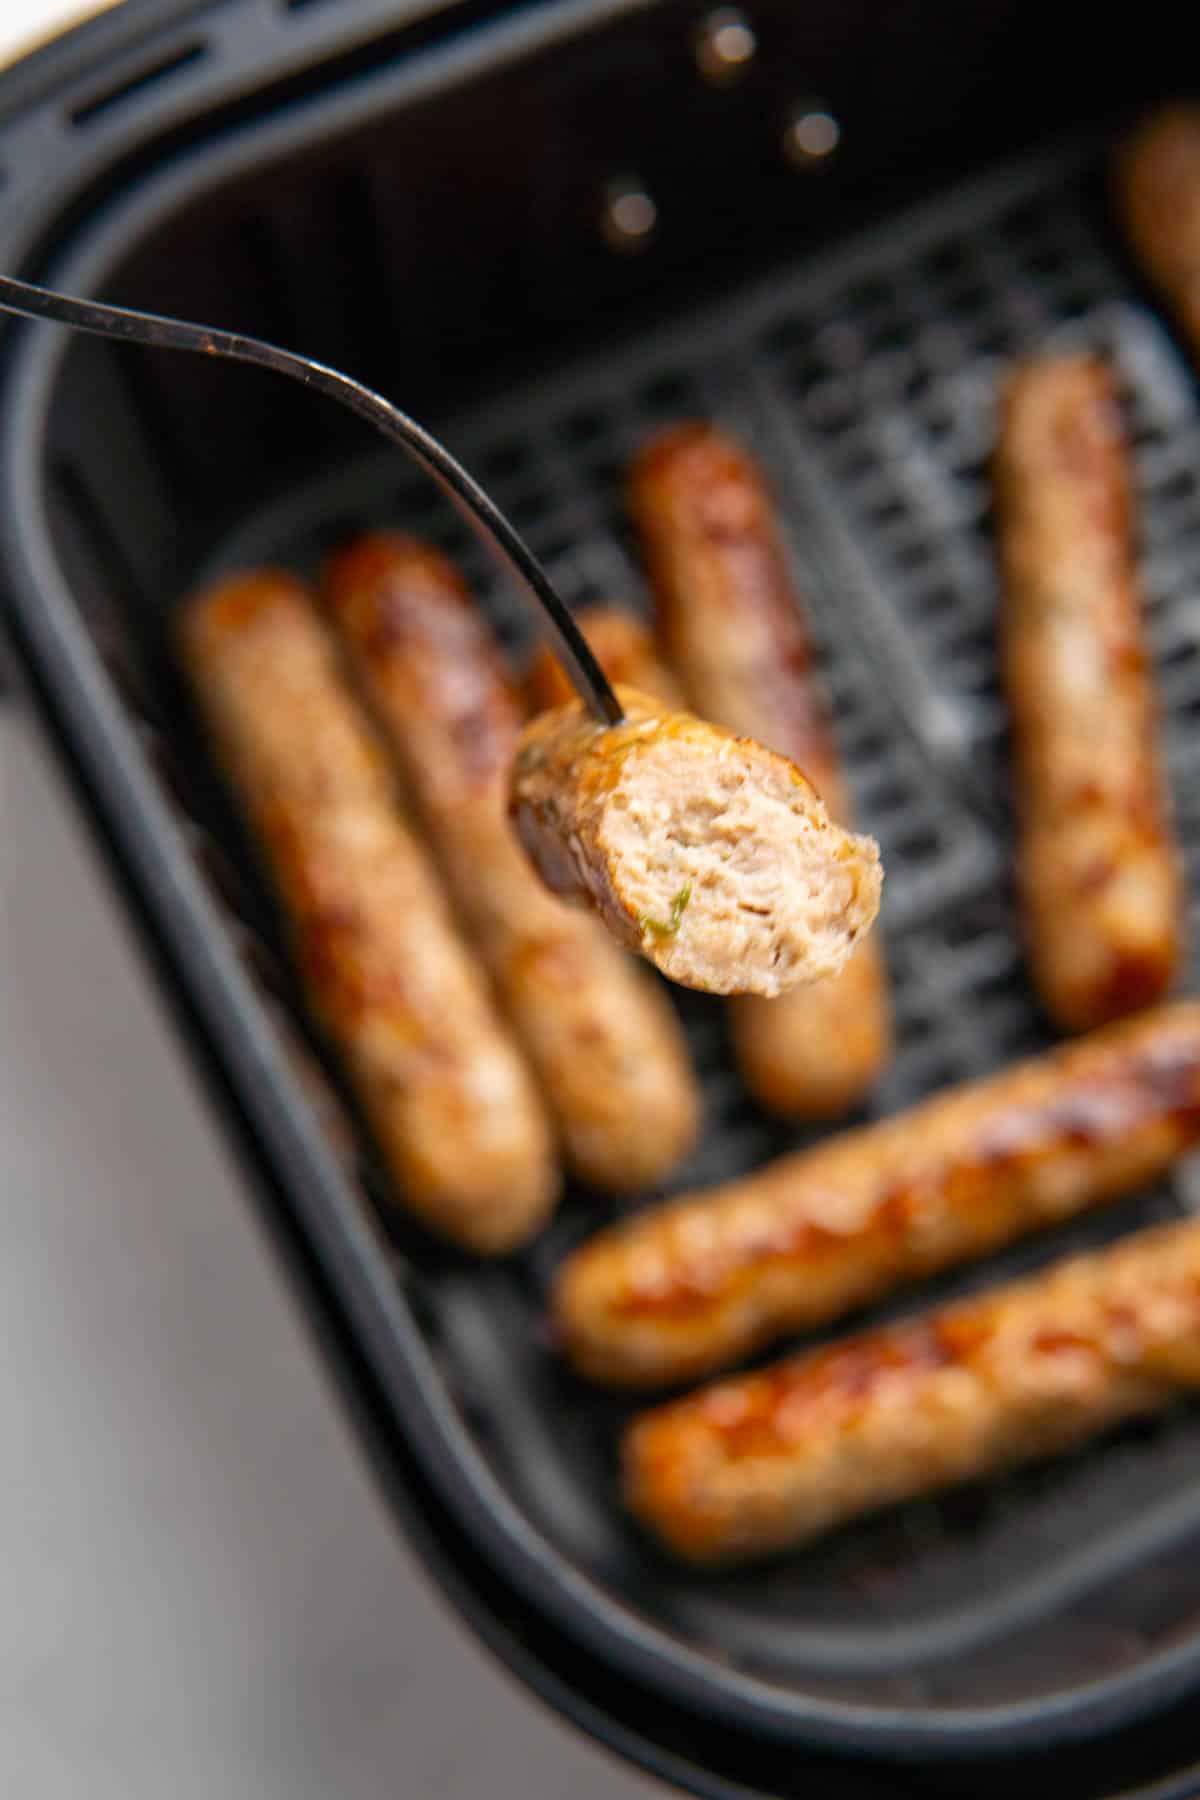 A fork showing the inside of a chicken sausage, the other sausages are blurred in the background. 